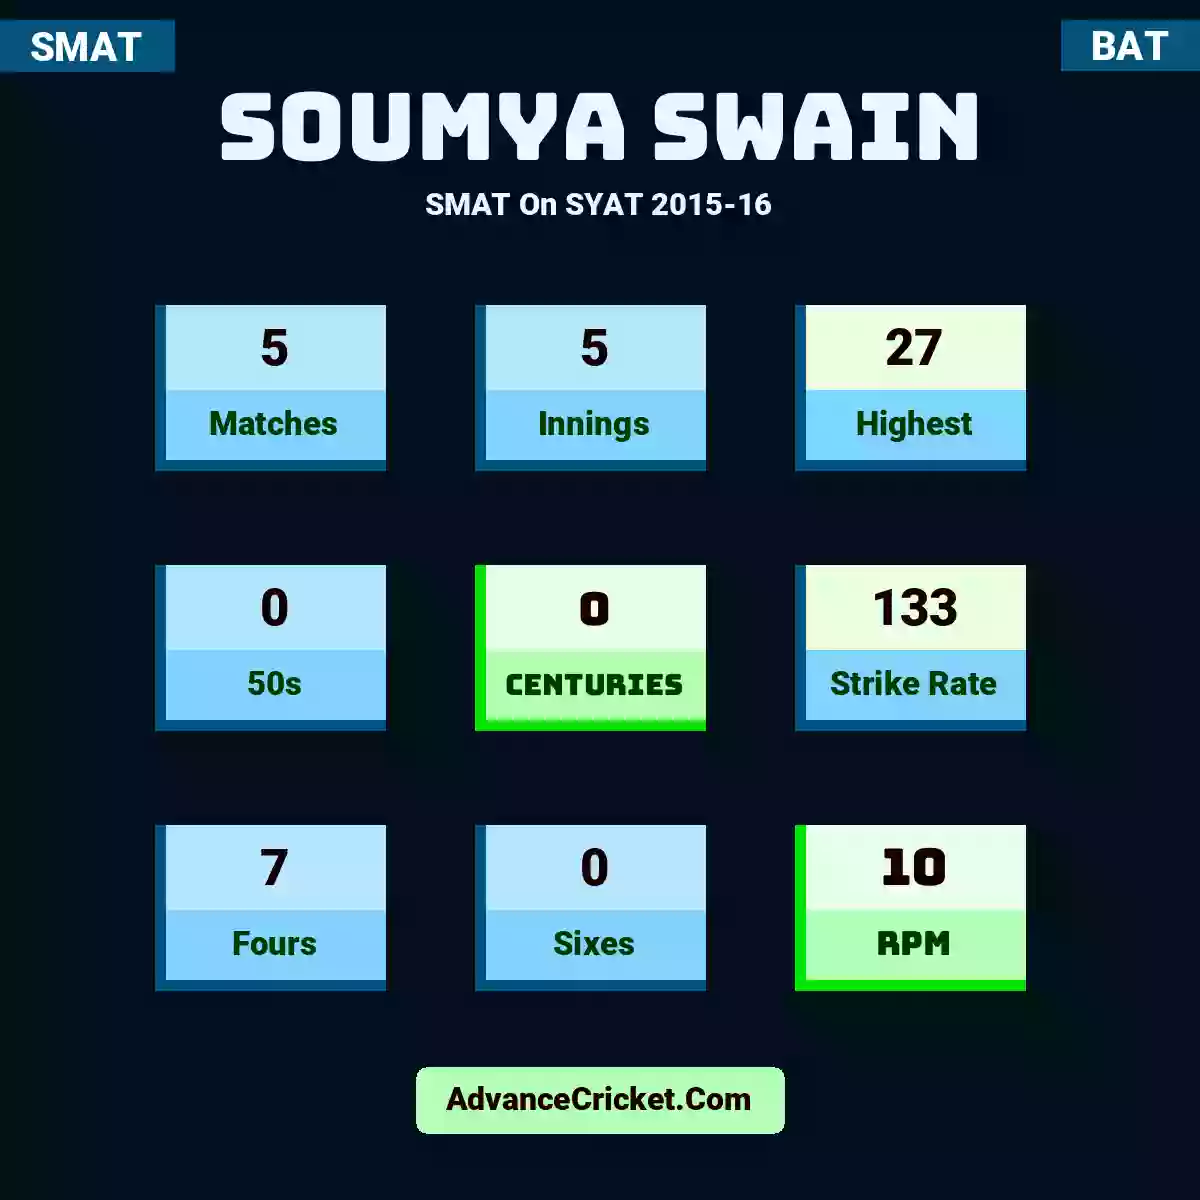 Soumya Swain SMAT  On SYAT 2015-16, Soumya Swain played 5 matches, scored 27 runs as highest, 0 half-centuries, and 0 centuries, with a strike rate of 133. S.Swain hit 7 fours and 0 sixes, with an RPM of 10.